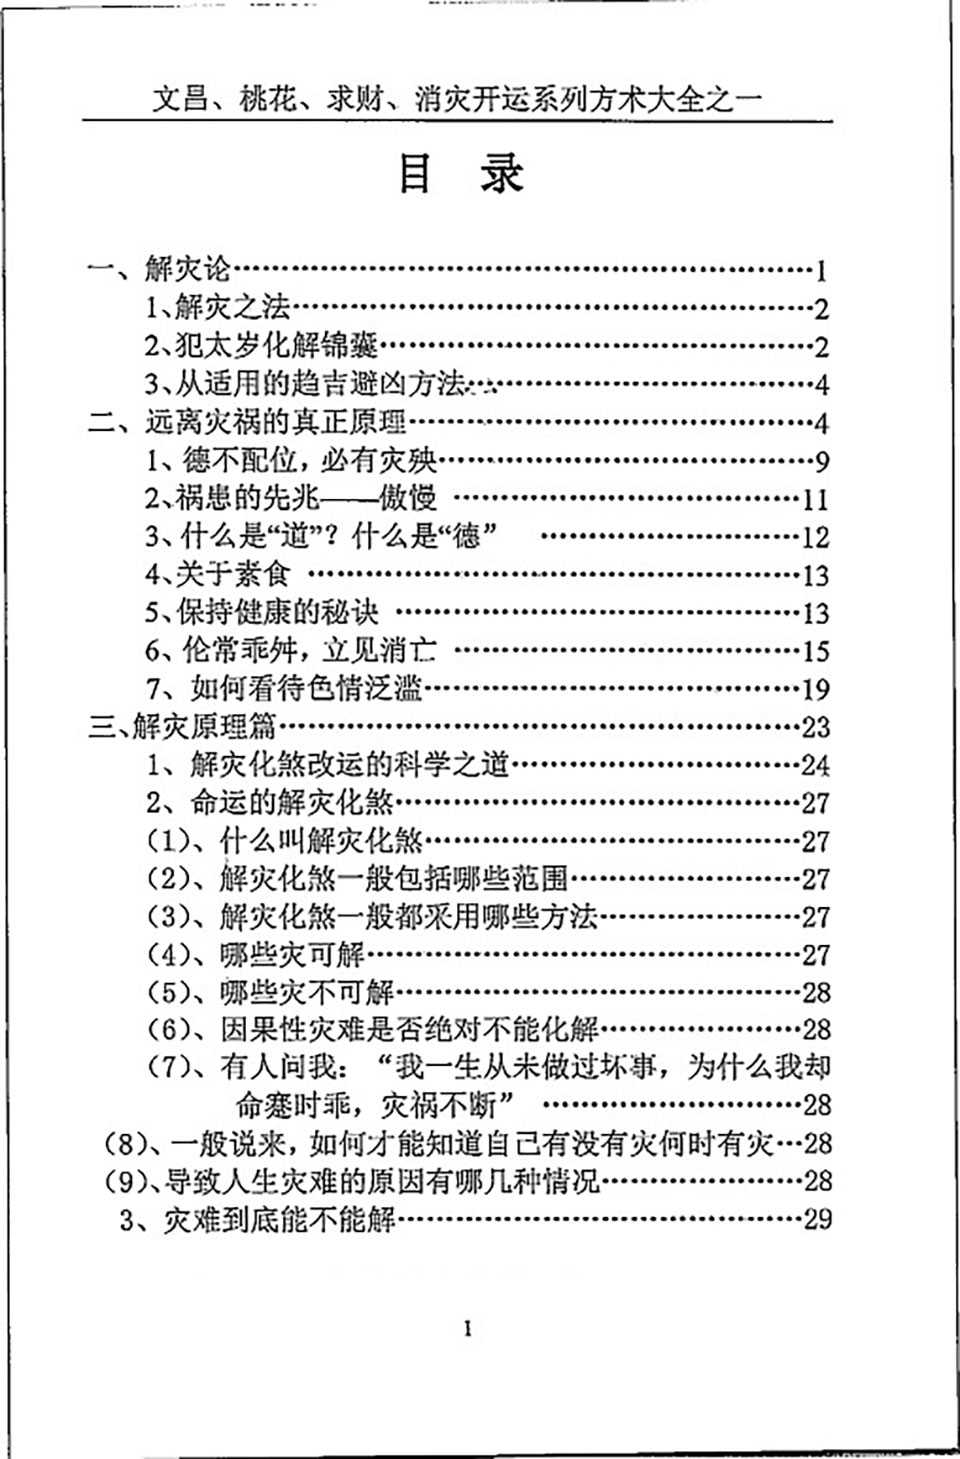 Tang Shuojia《 Compilation of Disasters and Difficulties, and Change of Fortune.pdf